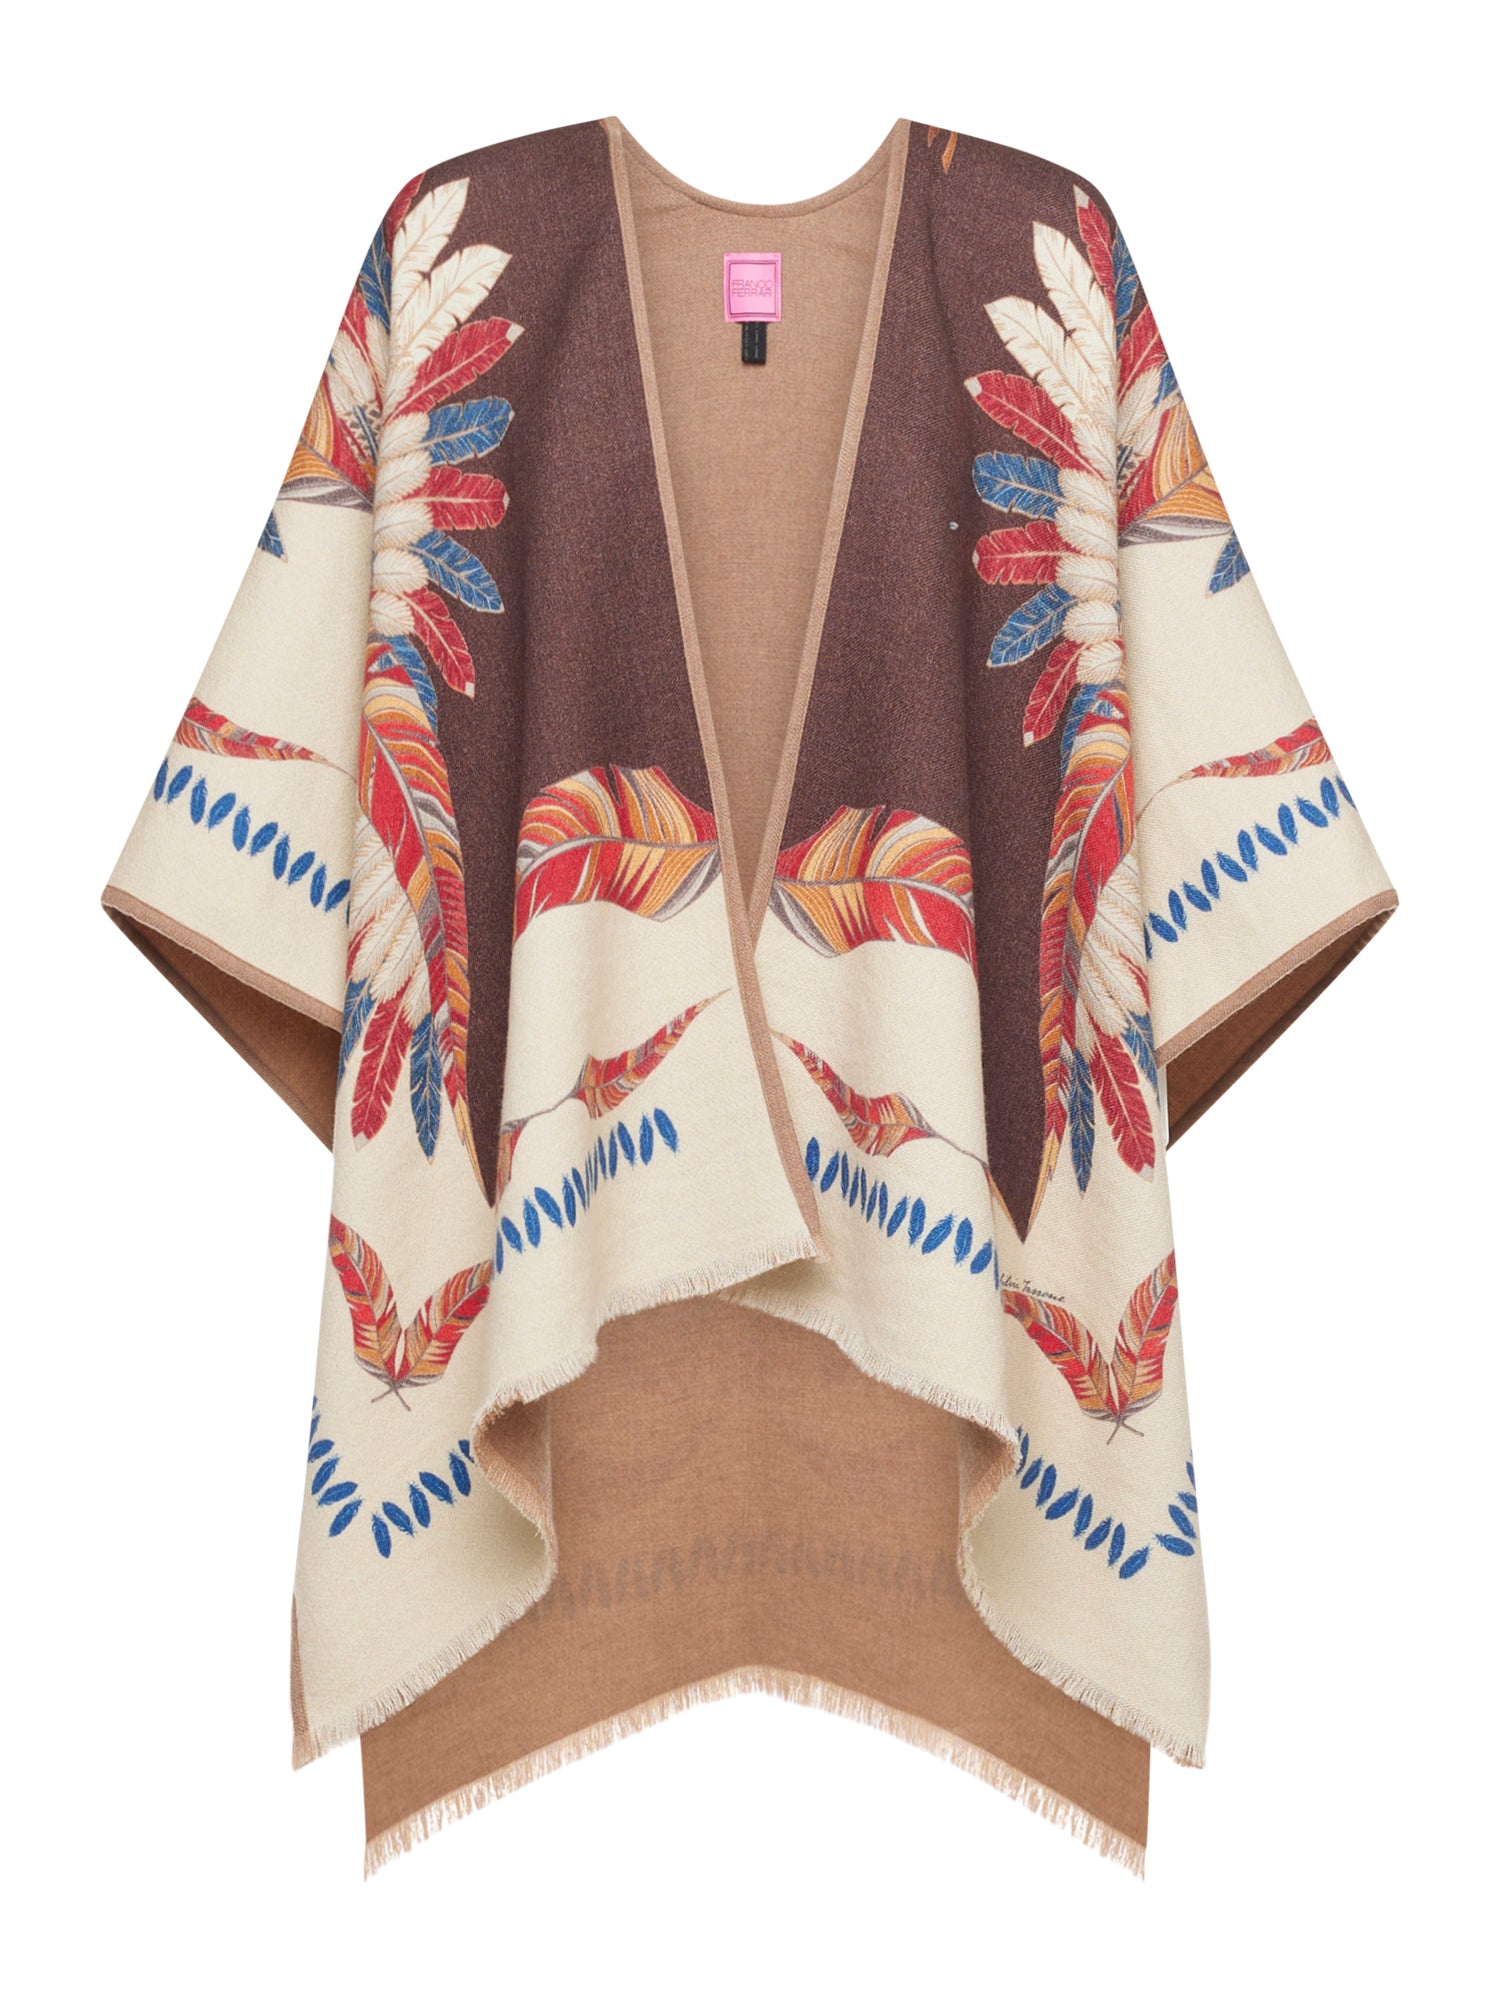 FEATHER CROWN PRINT WOOL CAPE